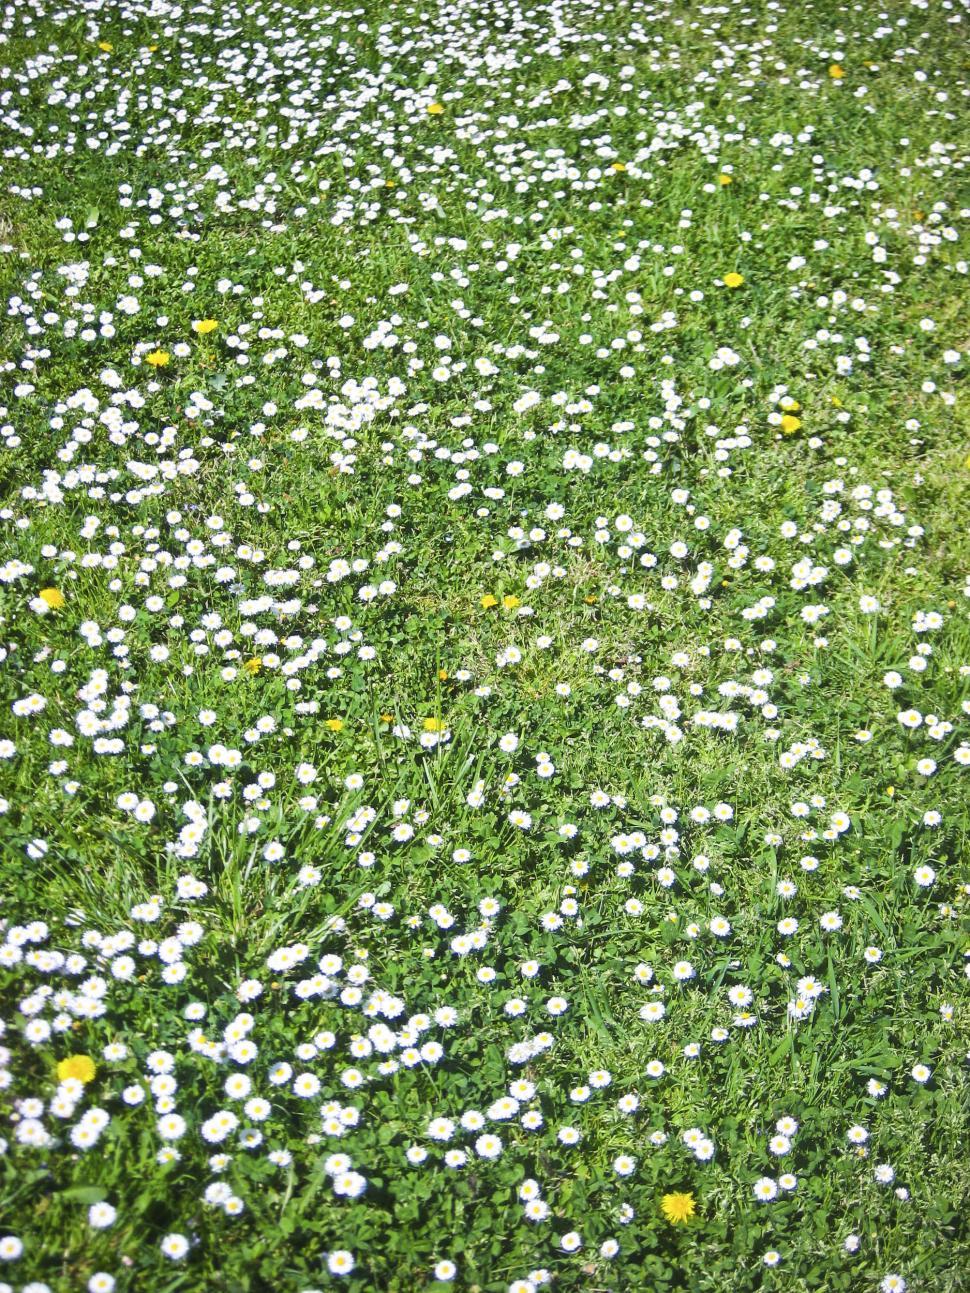 Download Free Stock Photo of grass and flowers 